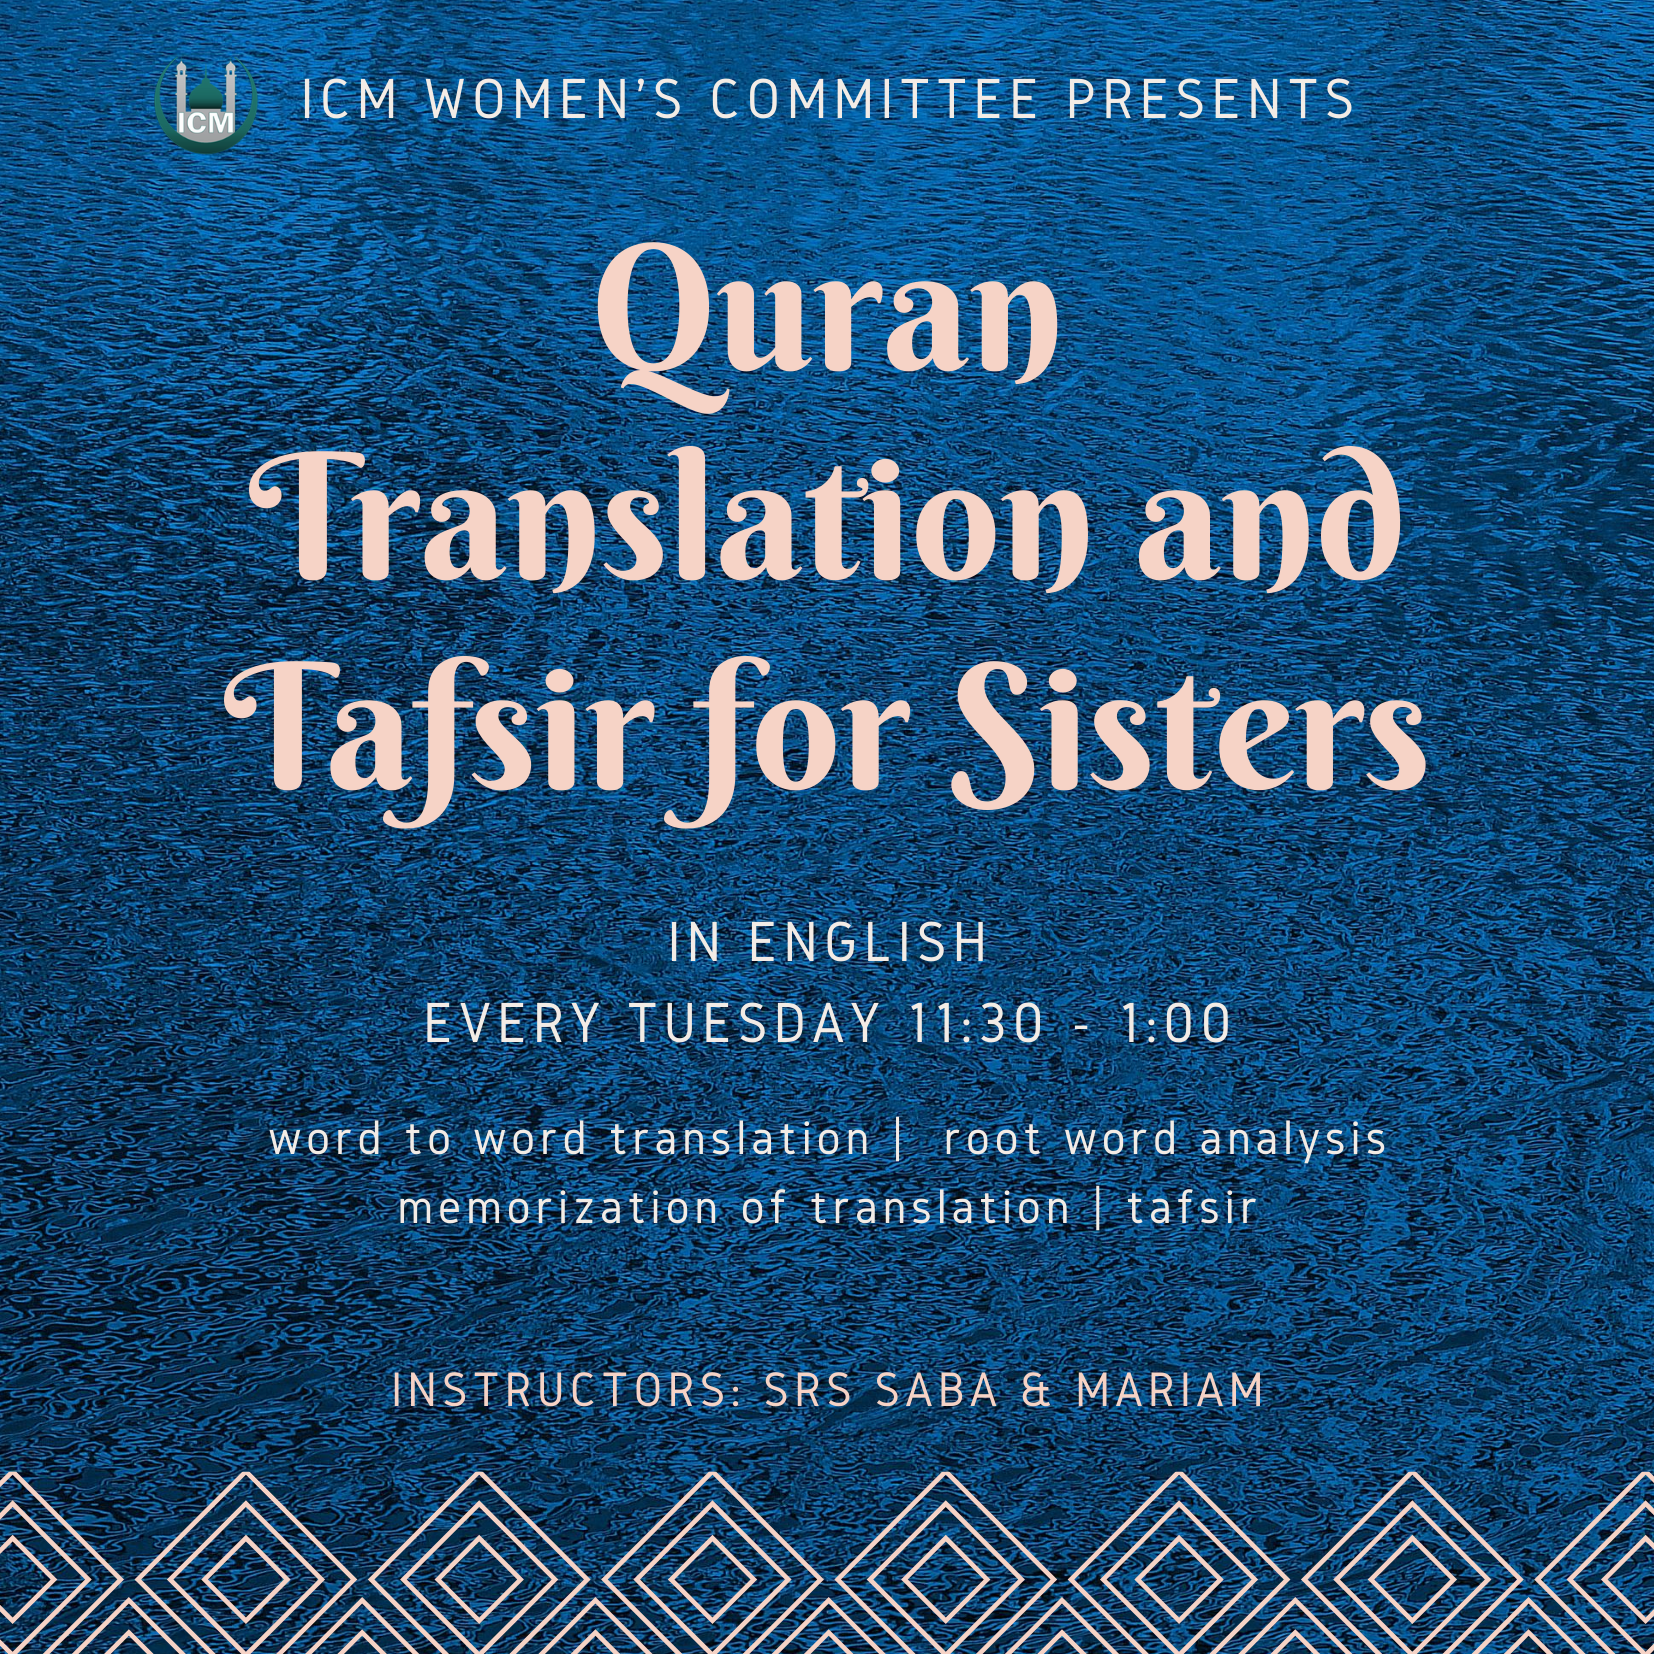 Quran Translation and Tafsir for Sisters